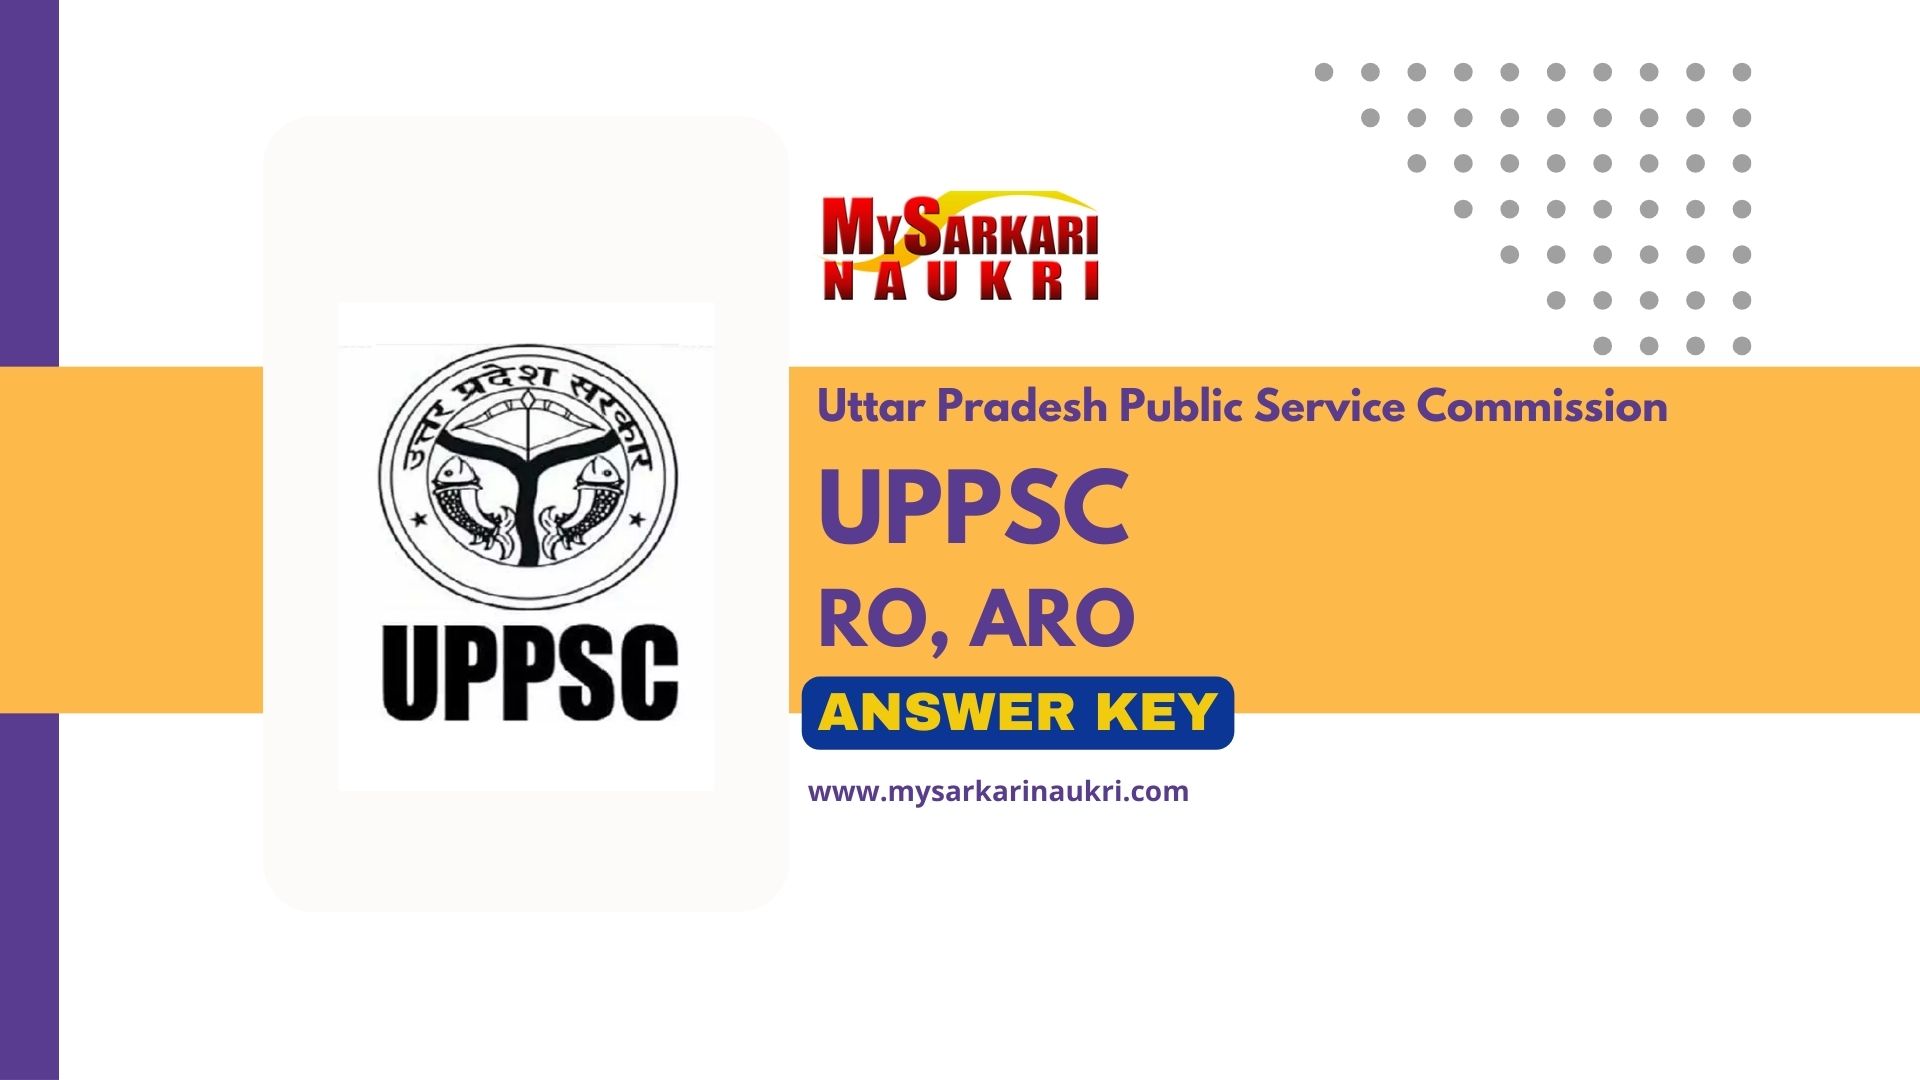 Difference between UPSC and UPPSC - All You Need To Know is Here!